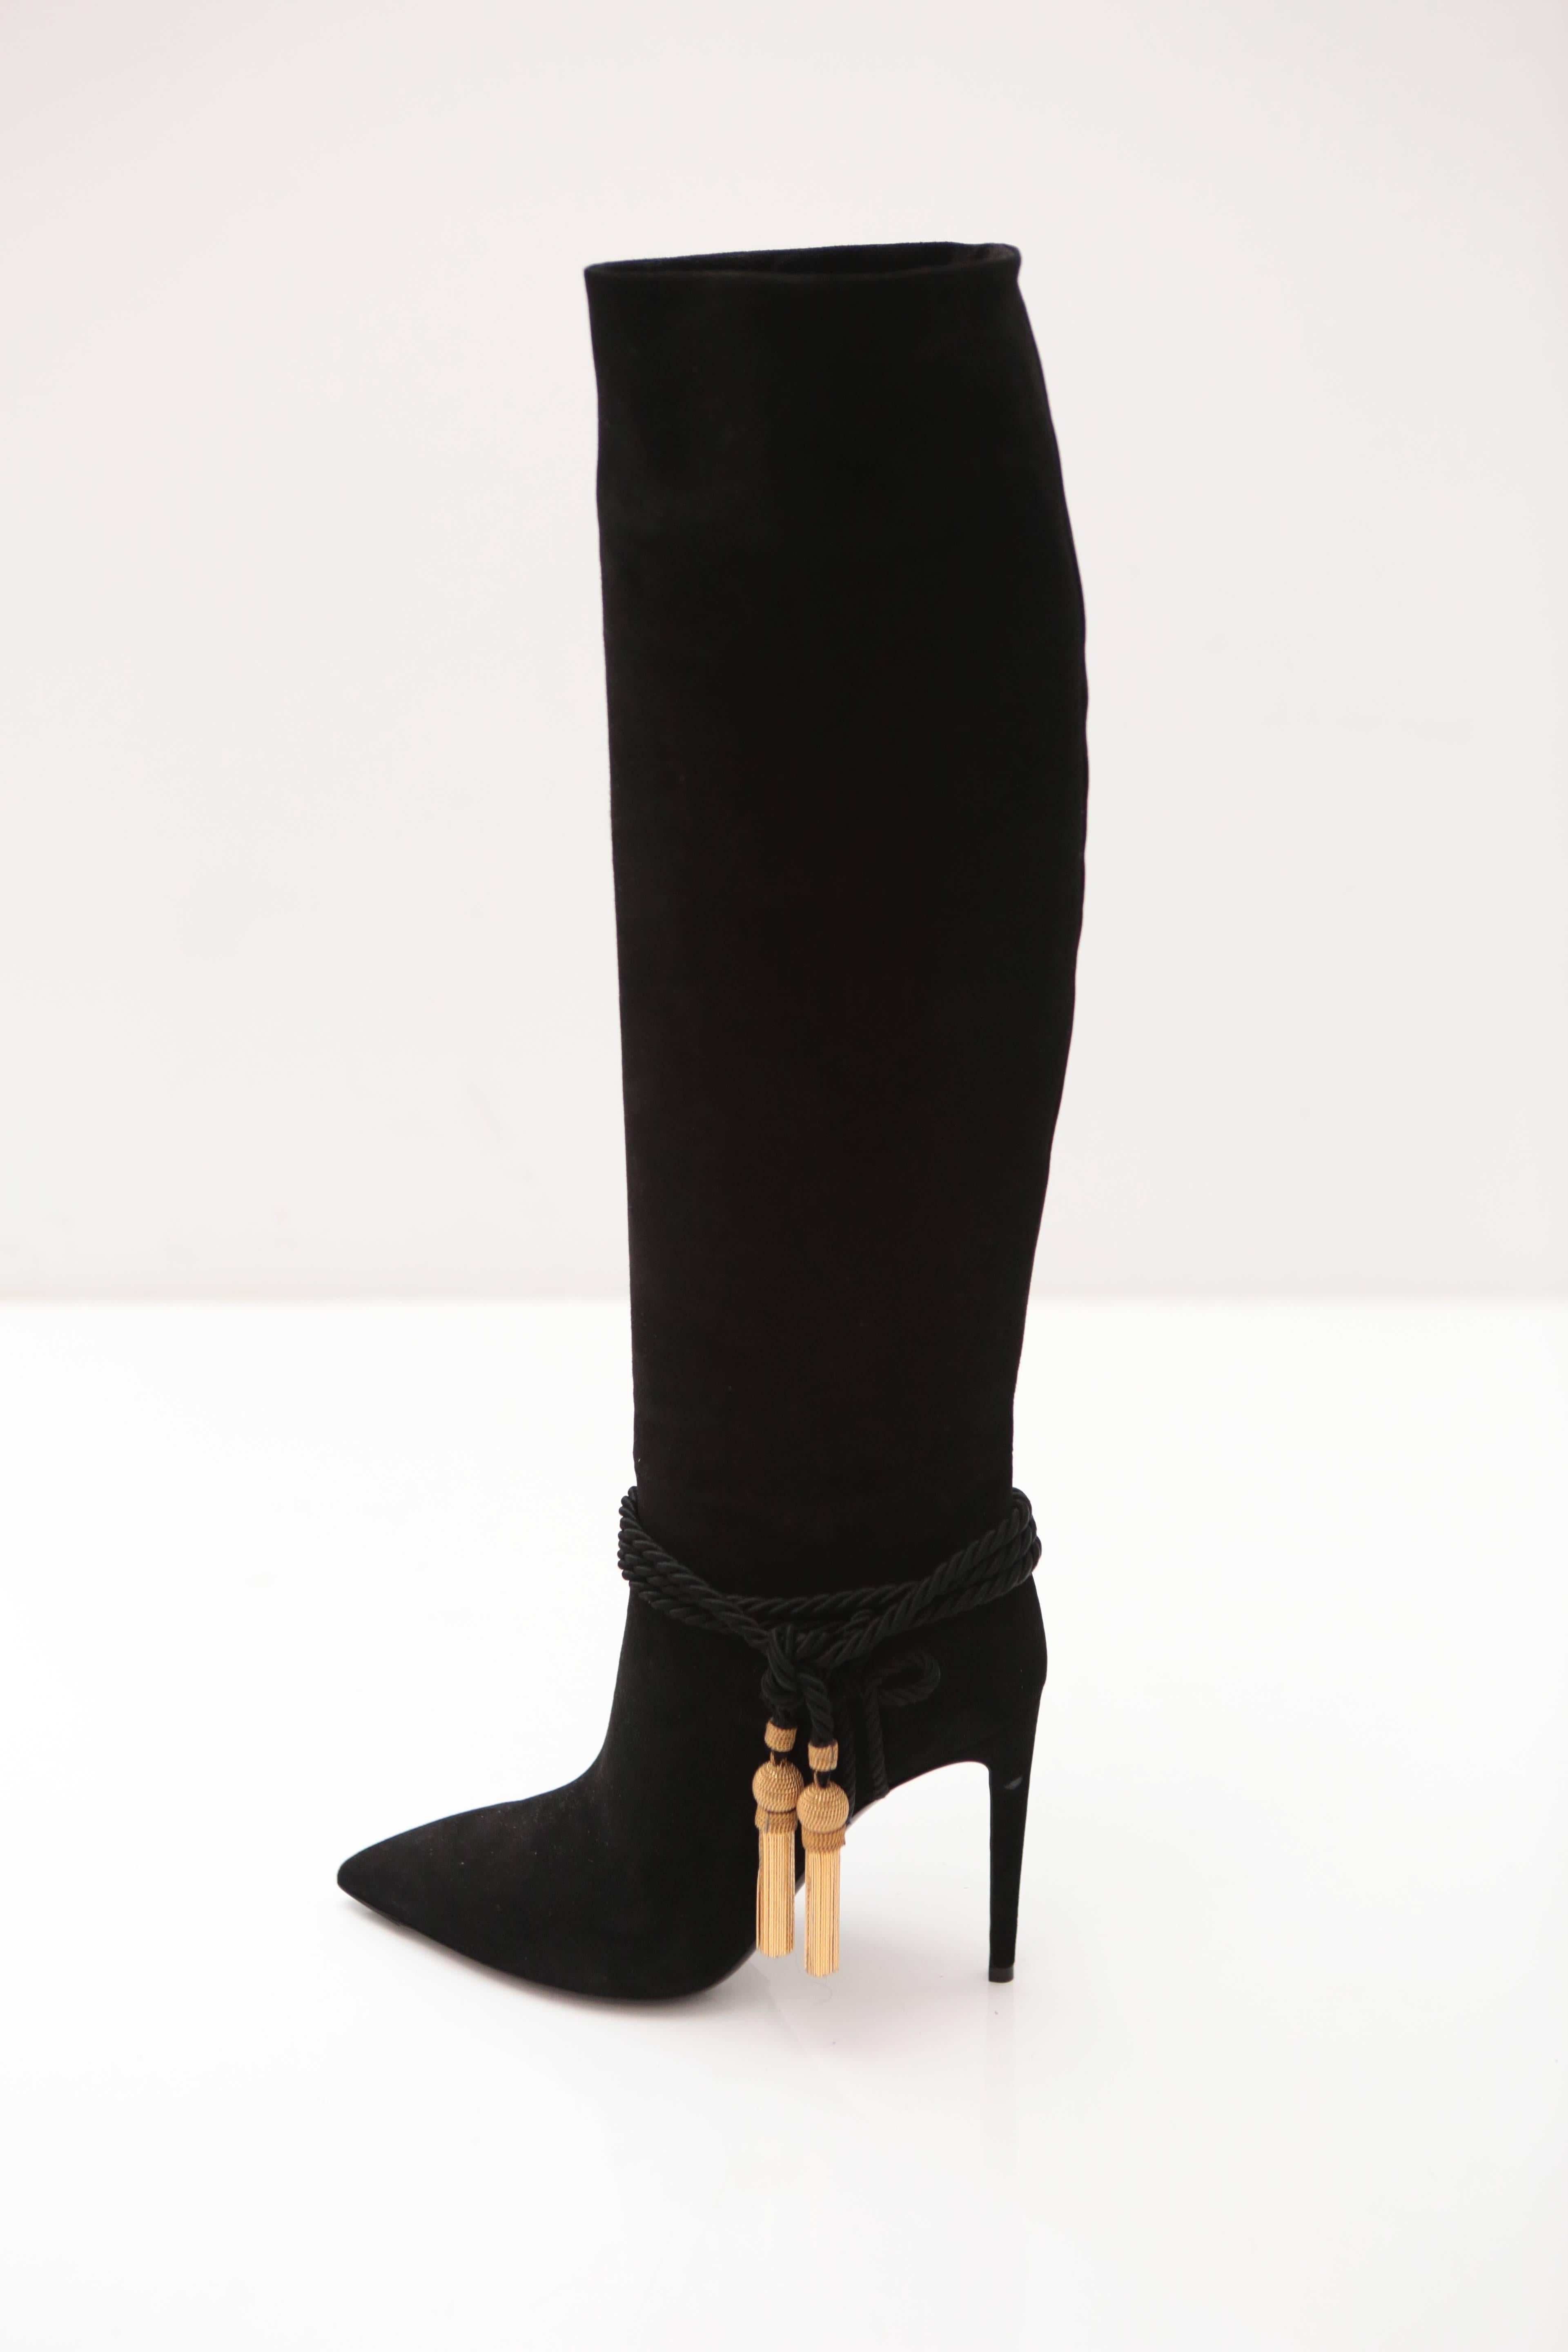 Suede Knee High Boots get tied up with a gold tassel to sass up any look.